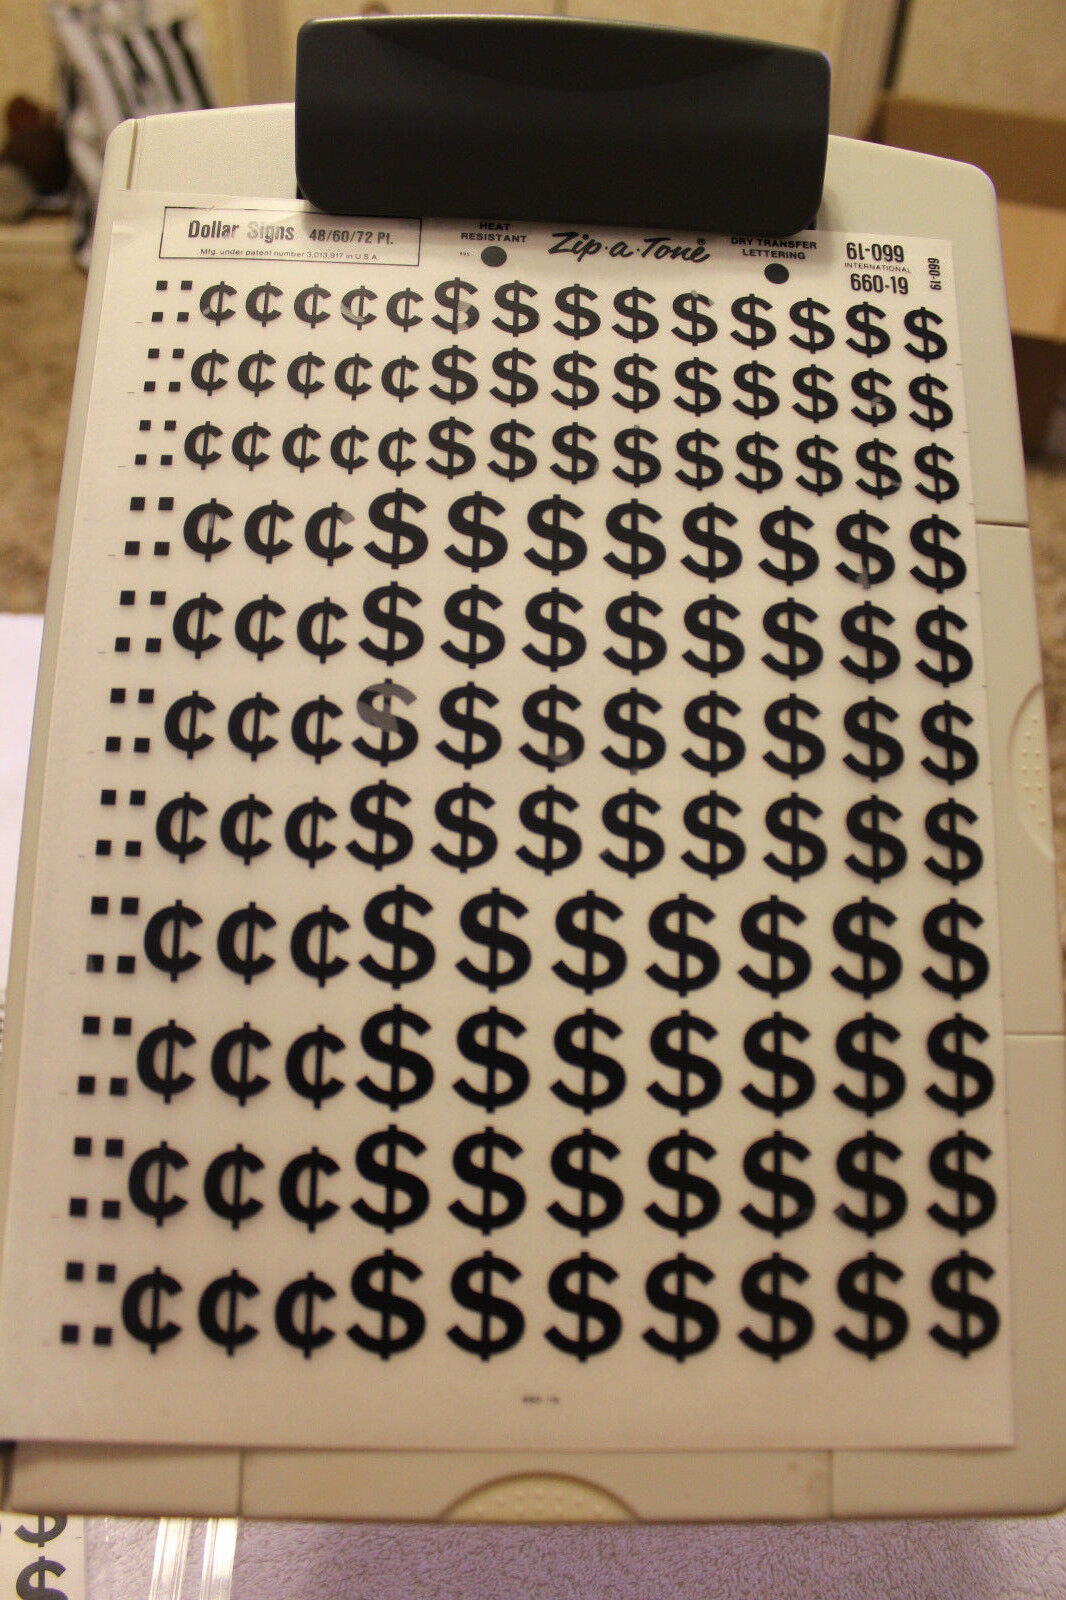 Free Shipping!  Zip.a.tone Dry Transfer Lettering #660-19  Dollar Signs, Cents